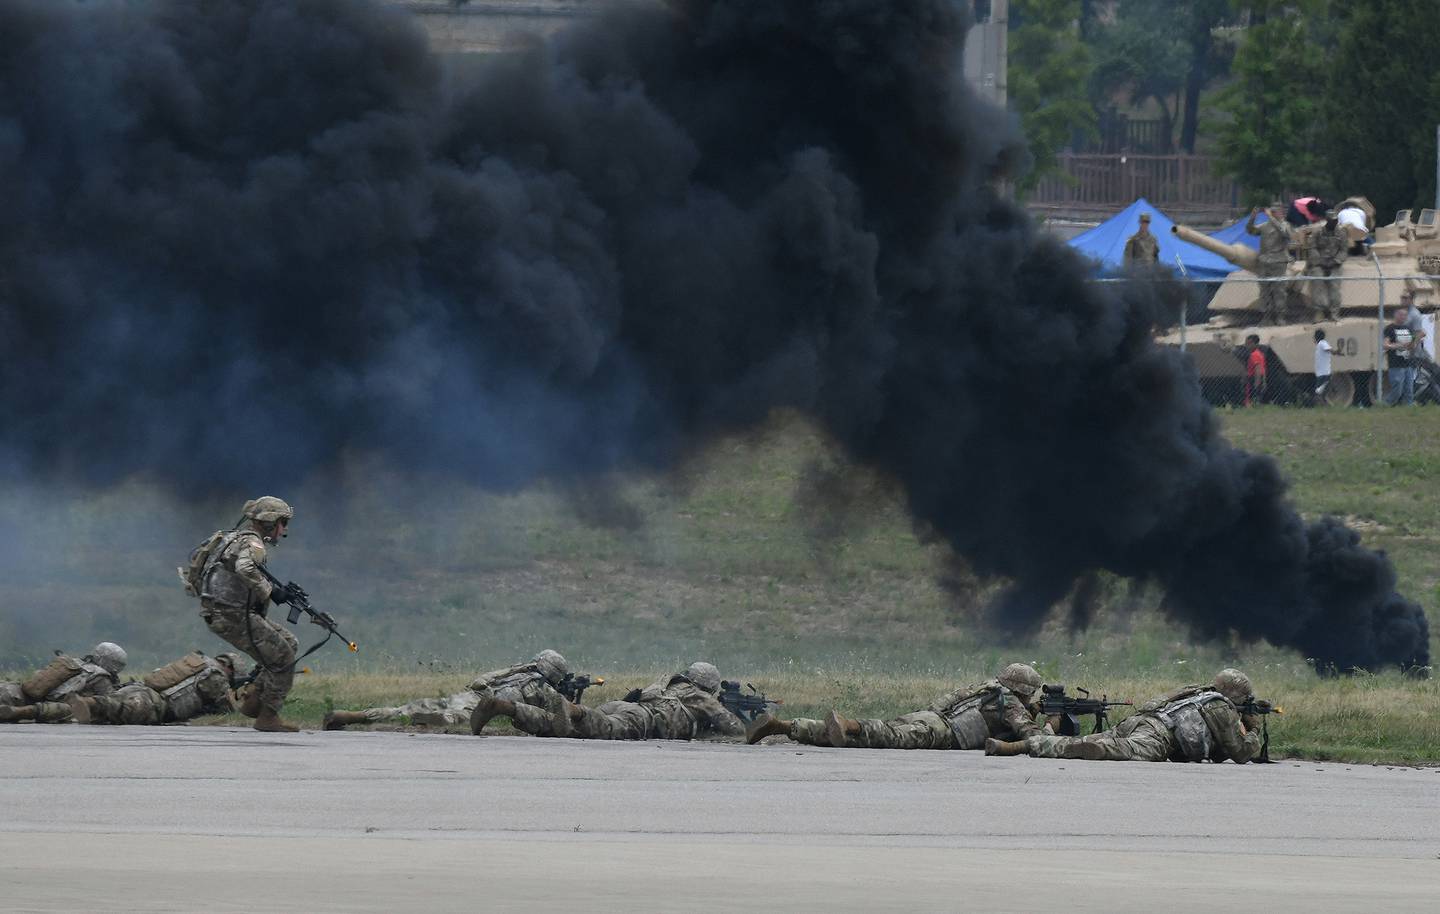 U.S. soldiers participate in a military tactical demonstration during a ceremony to commemorate the 75th anniversary of the Eighth U.S. Army at Camp Humphreys in Pyeongtaek on June 8, 2019.